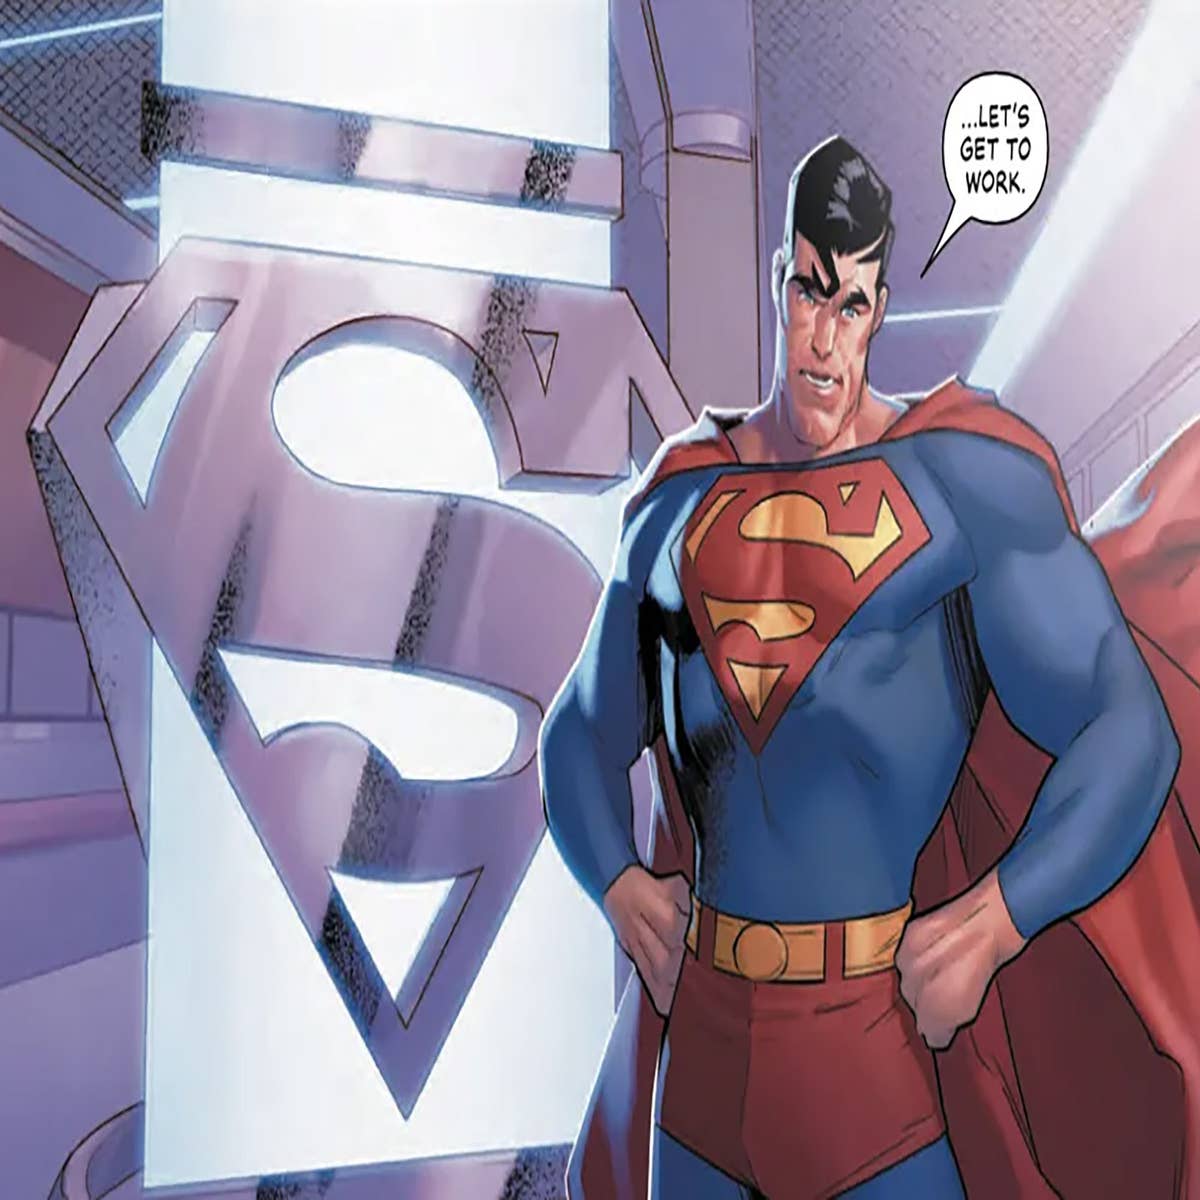 Man Of Steel' 2 In The Works? 4 Villains We Want To See In The Superman  Sequel